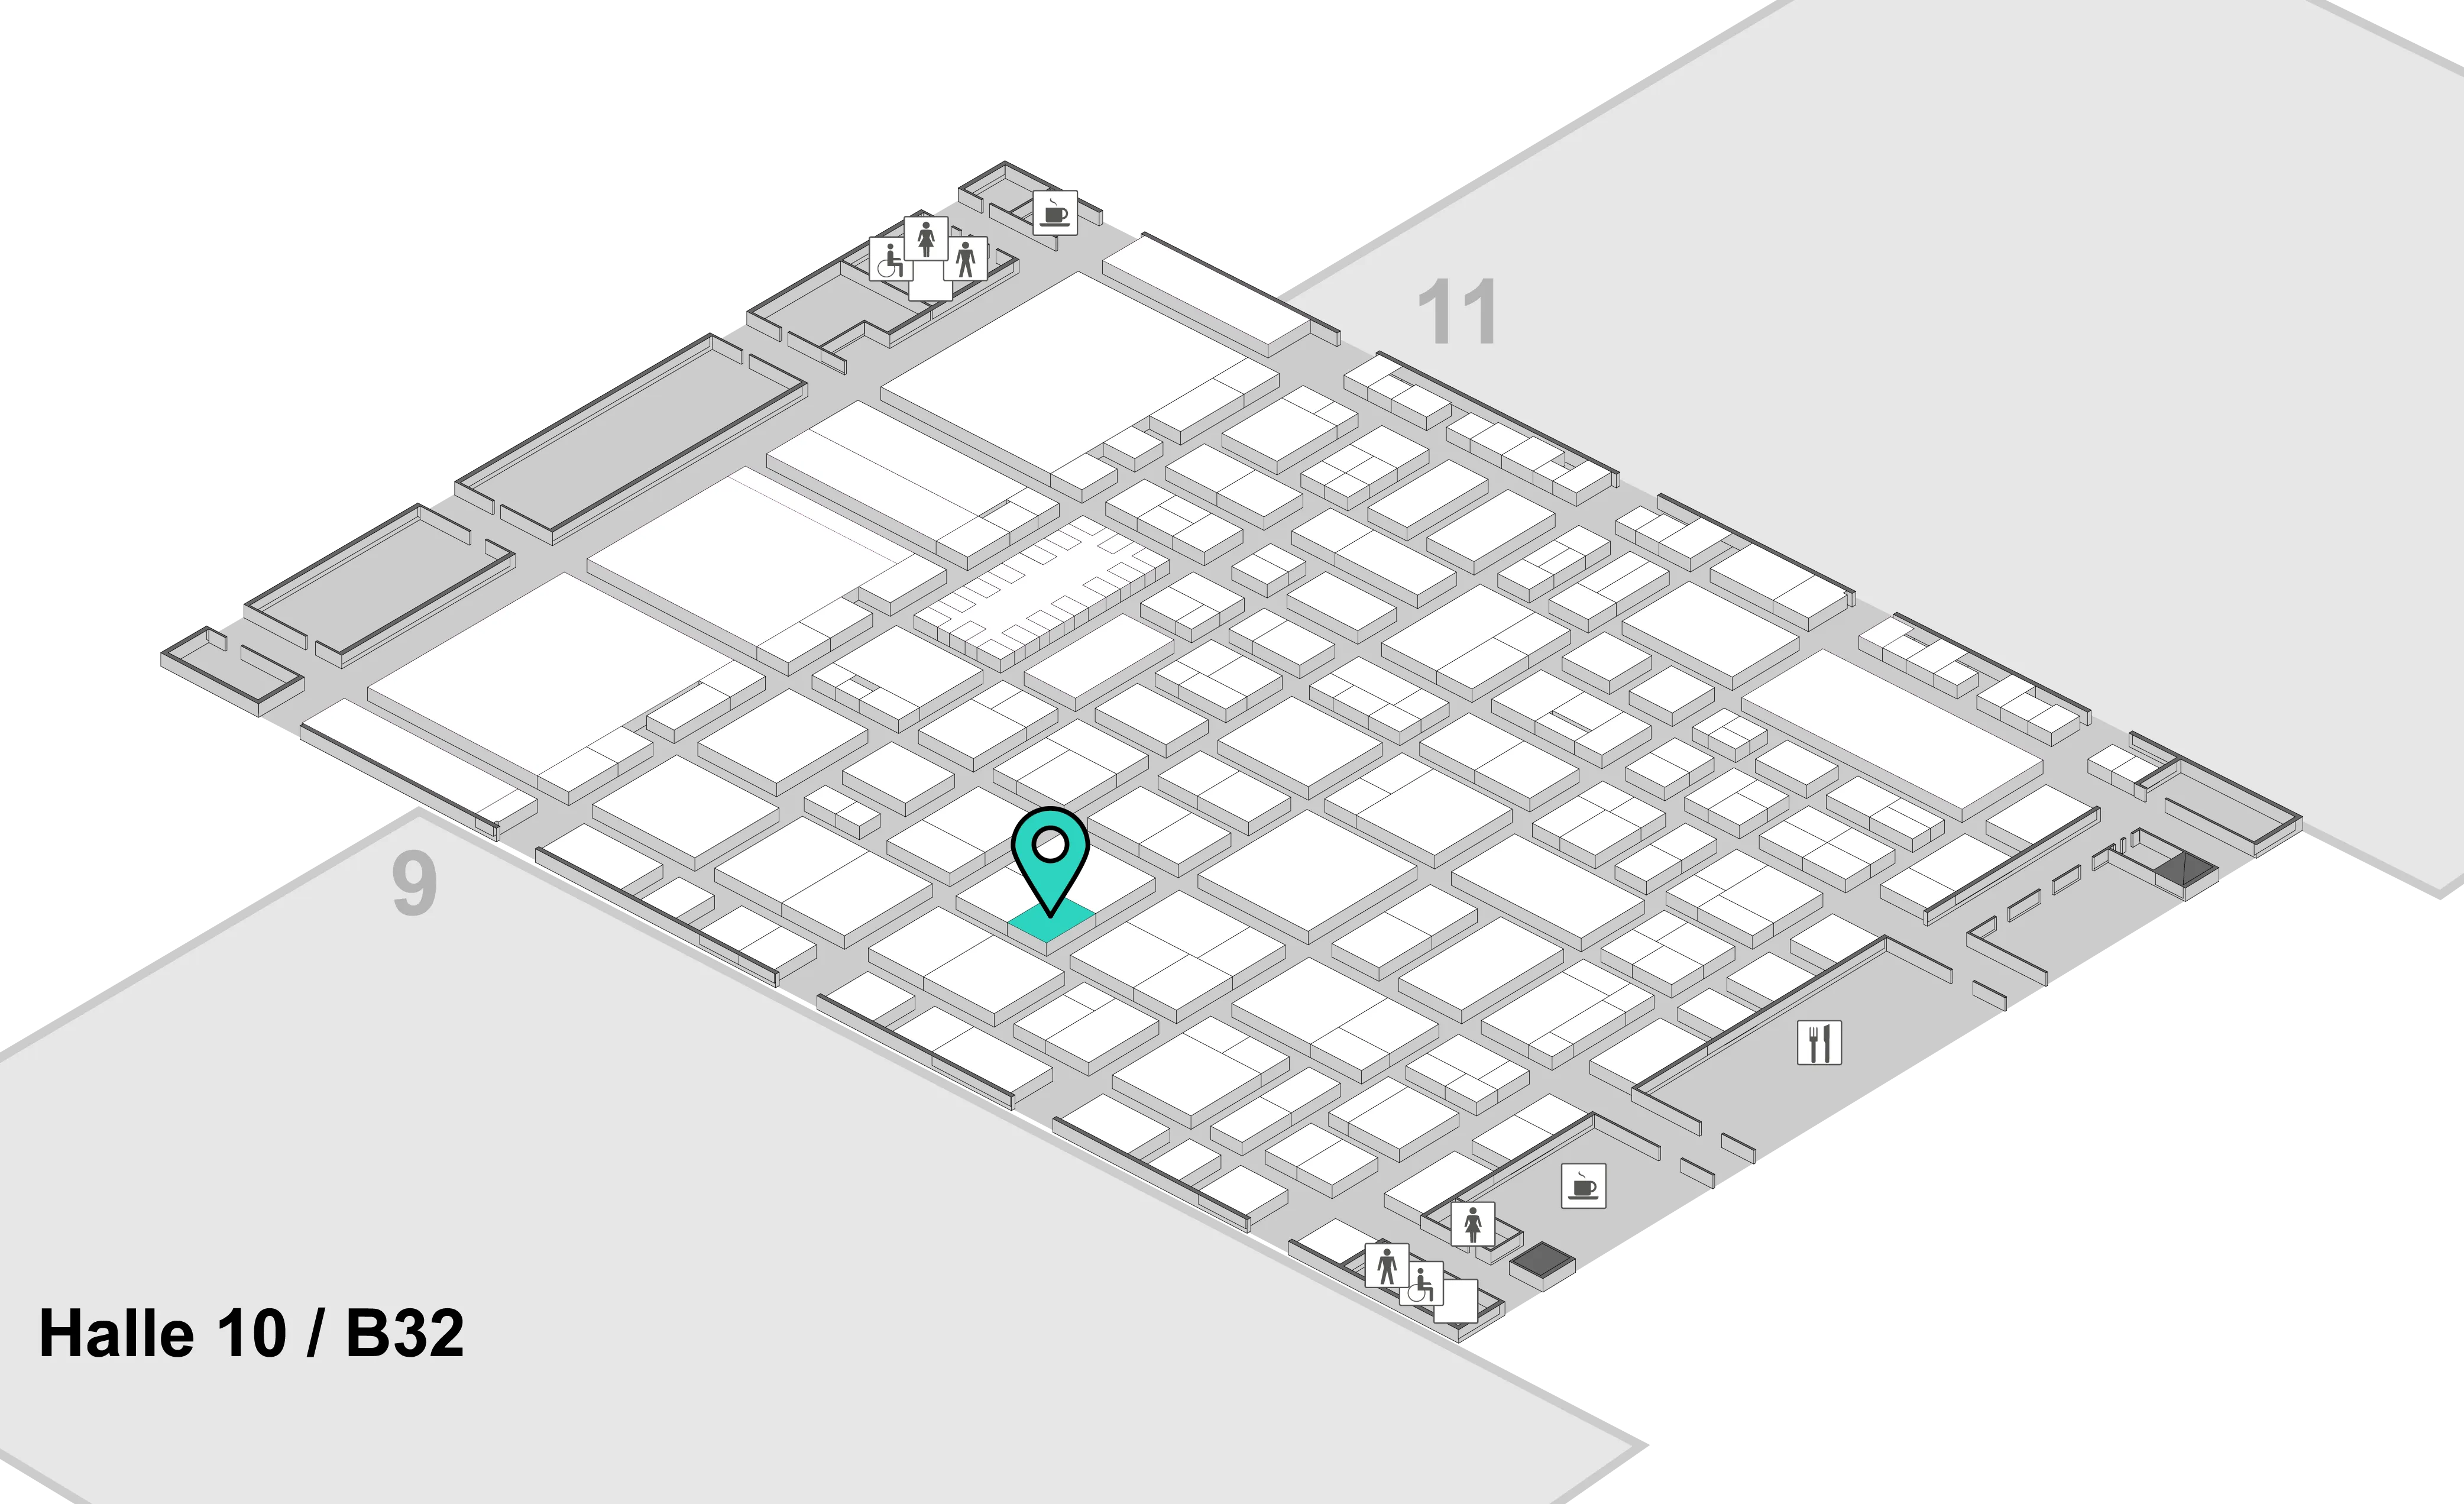 Visual depiction of the EuroCIS event location with the fiskaly booth Hall 10 / B32 highlighted